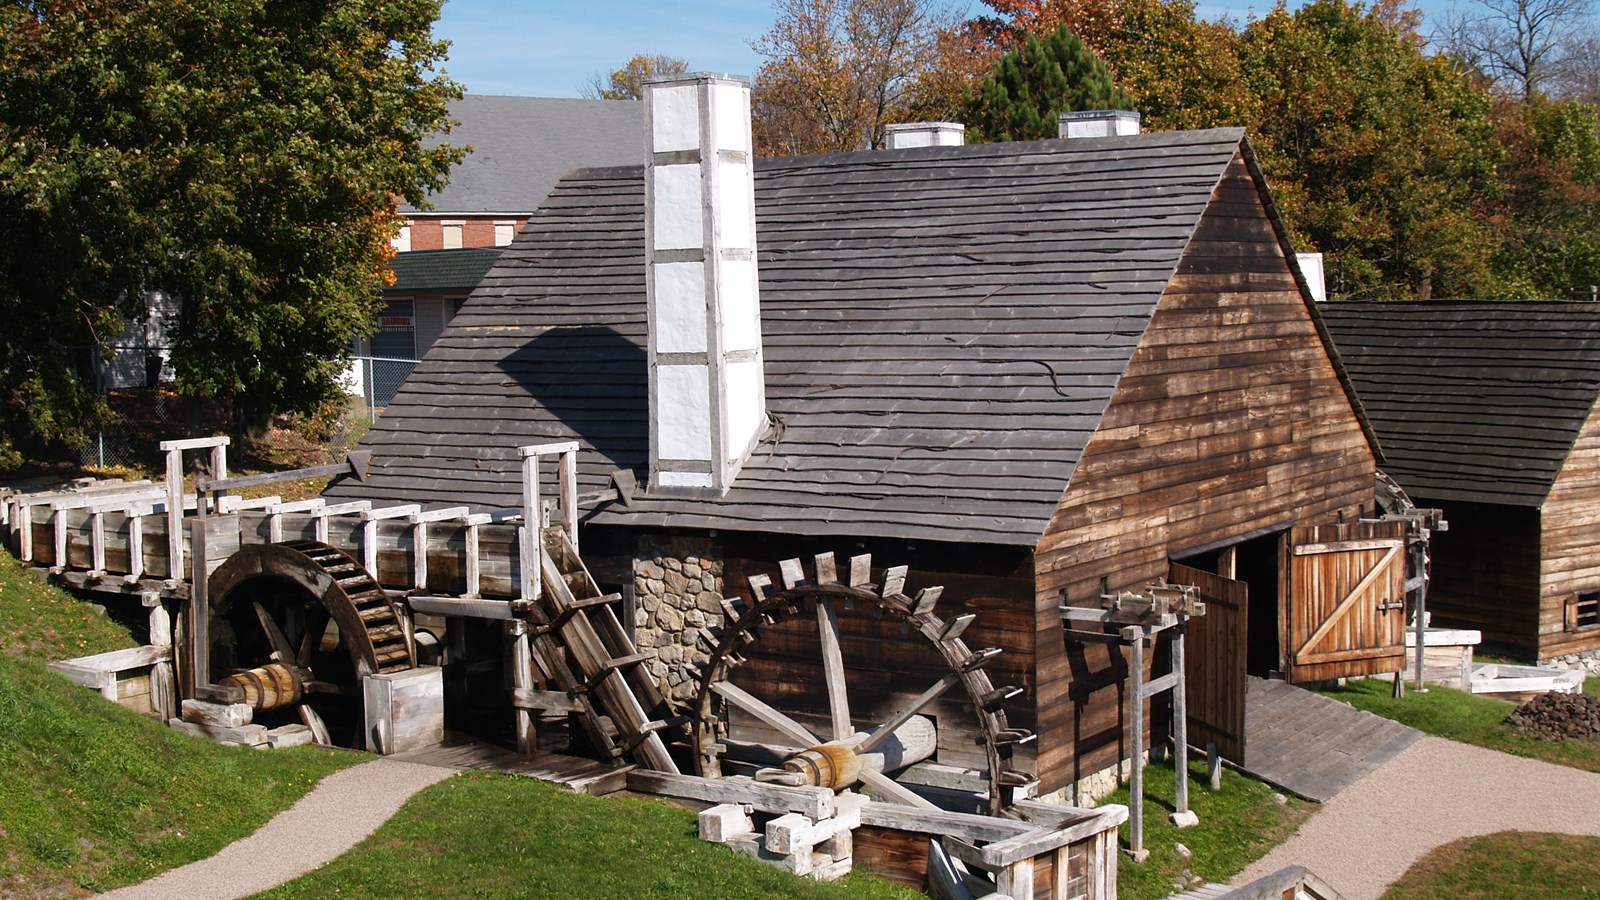 A wood cladded barn shaped structure with waterwheels and chimneys on either side